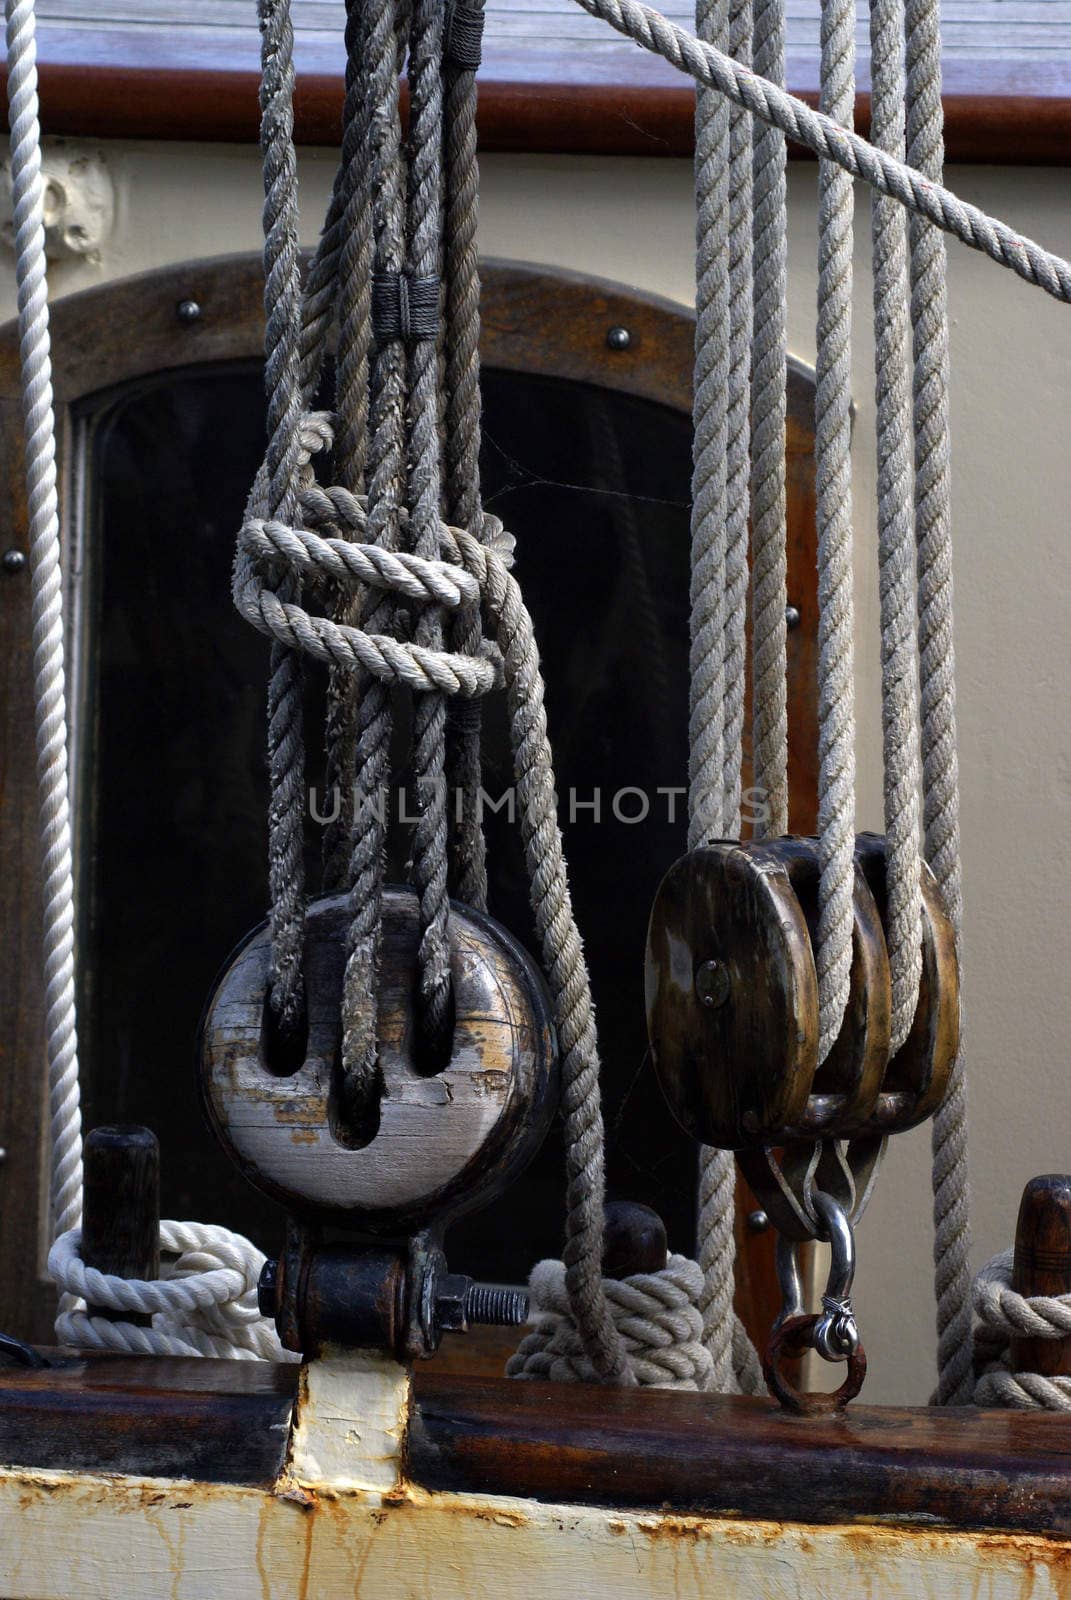 A photo showing the details of a ships rope pulleys.